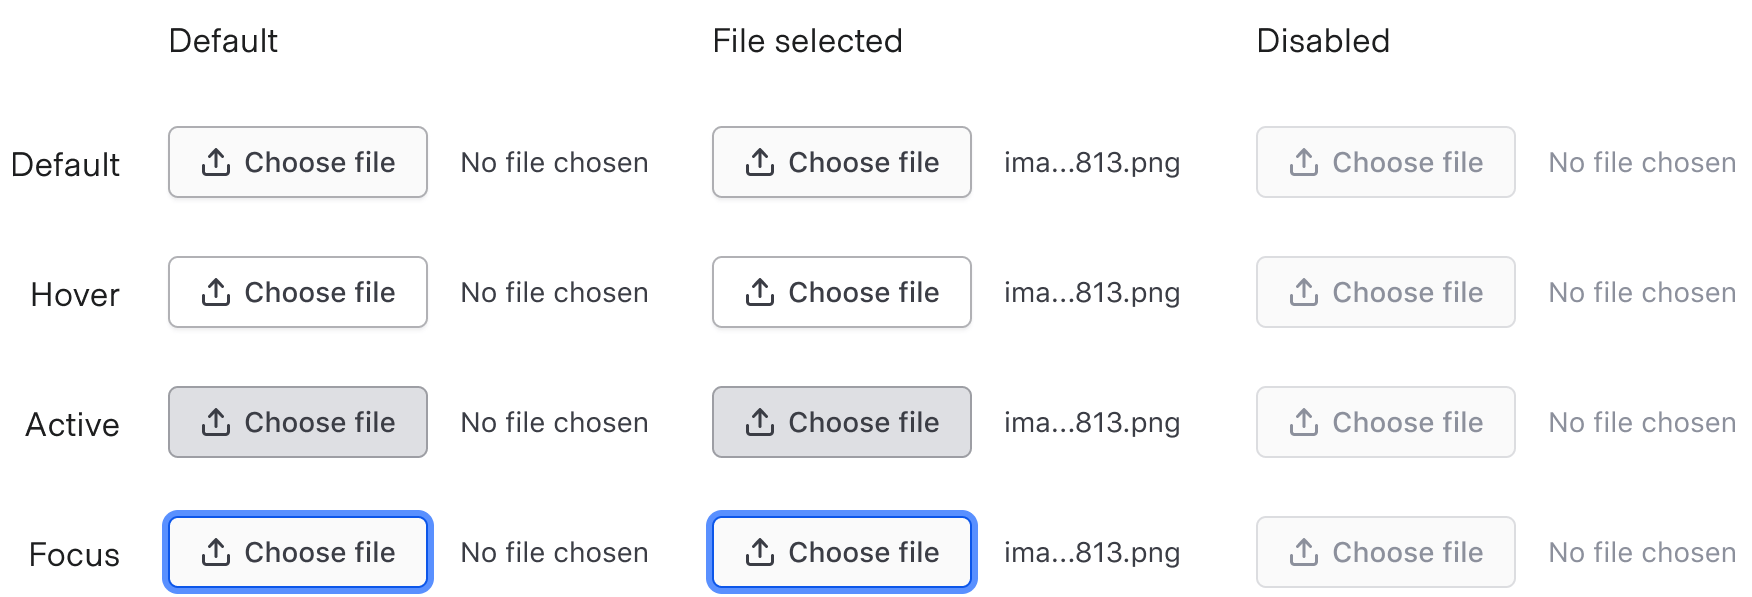 Example of File Input states